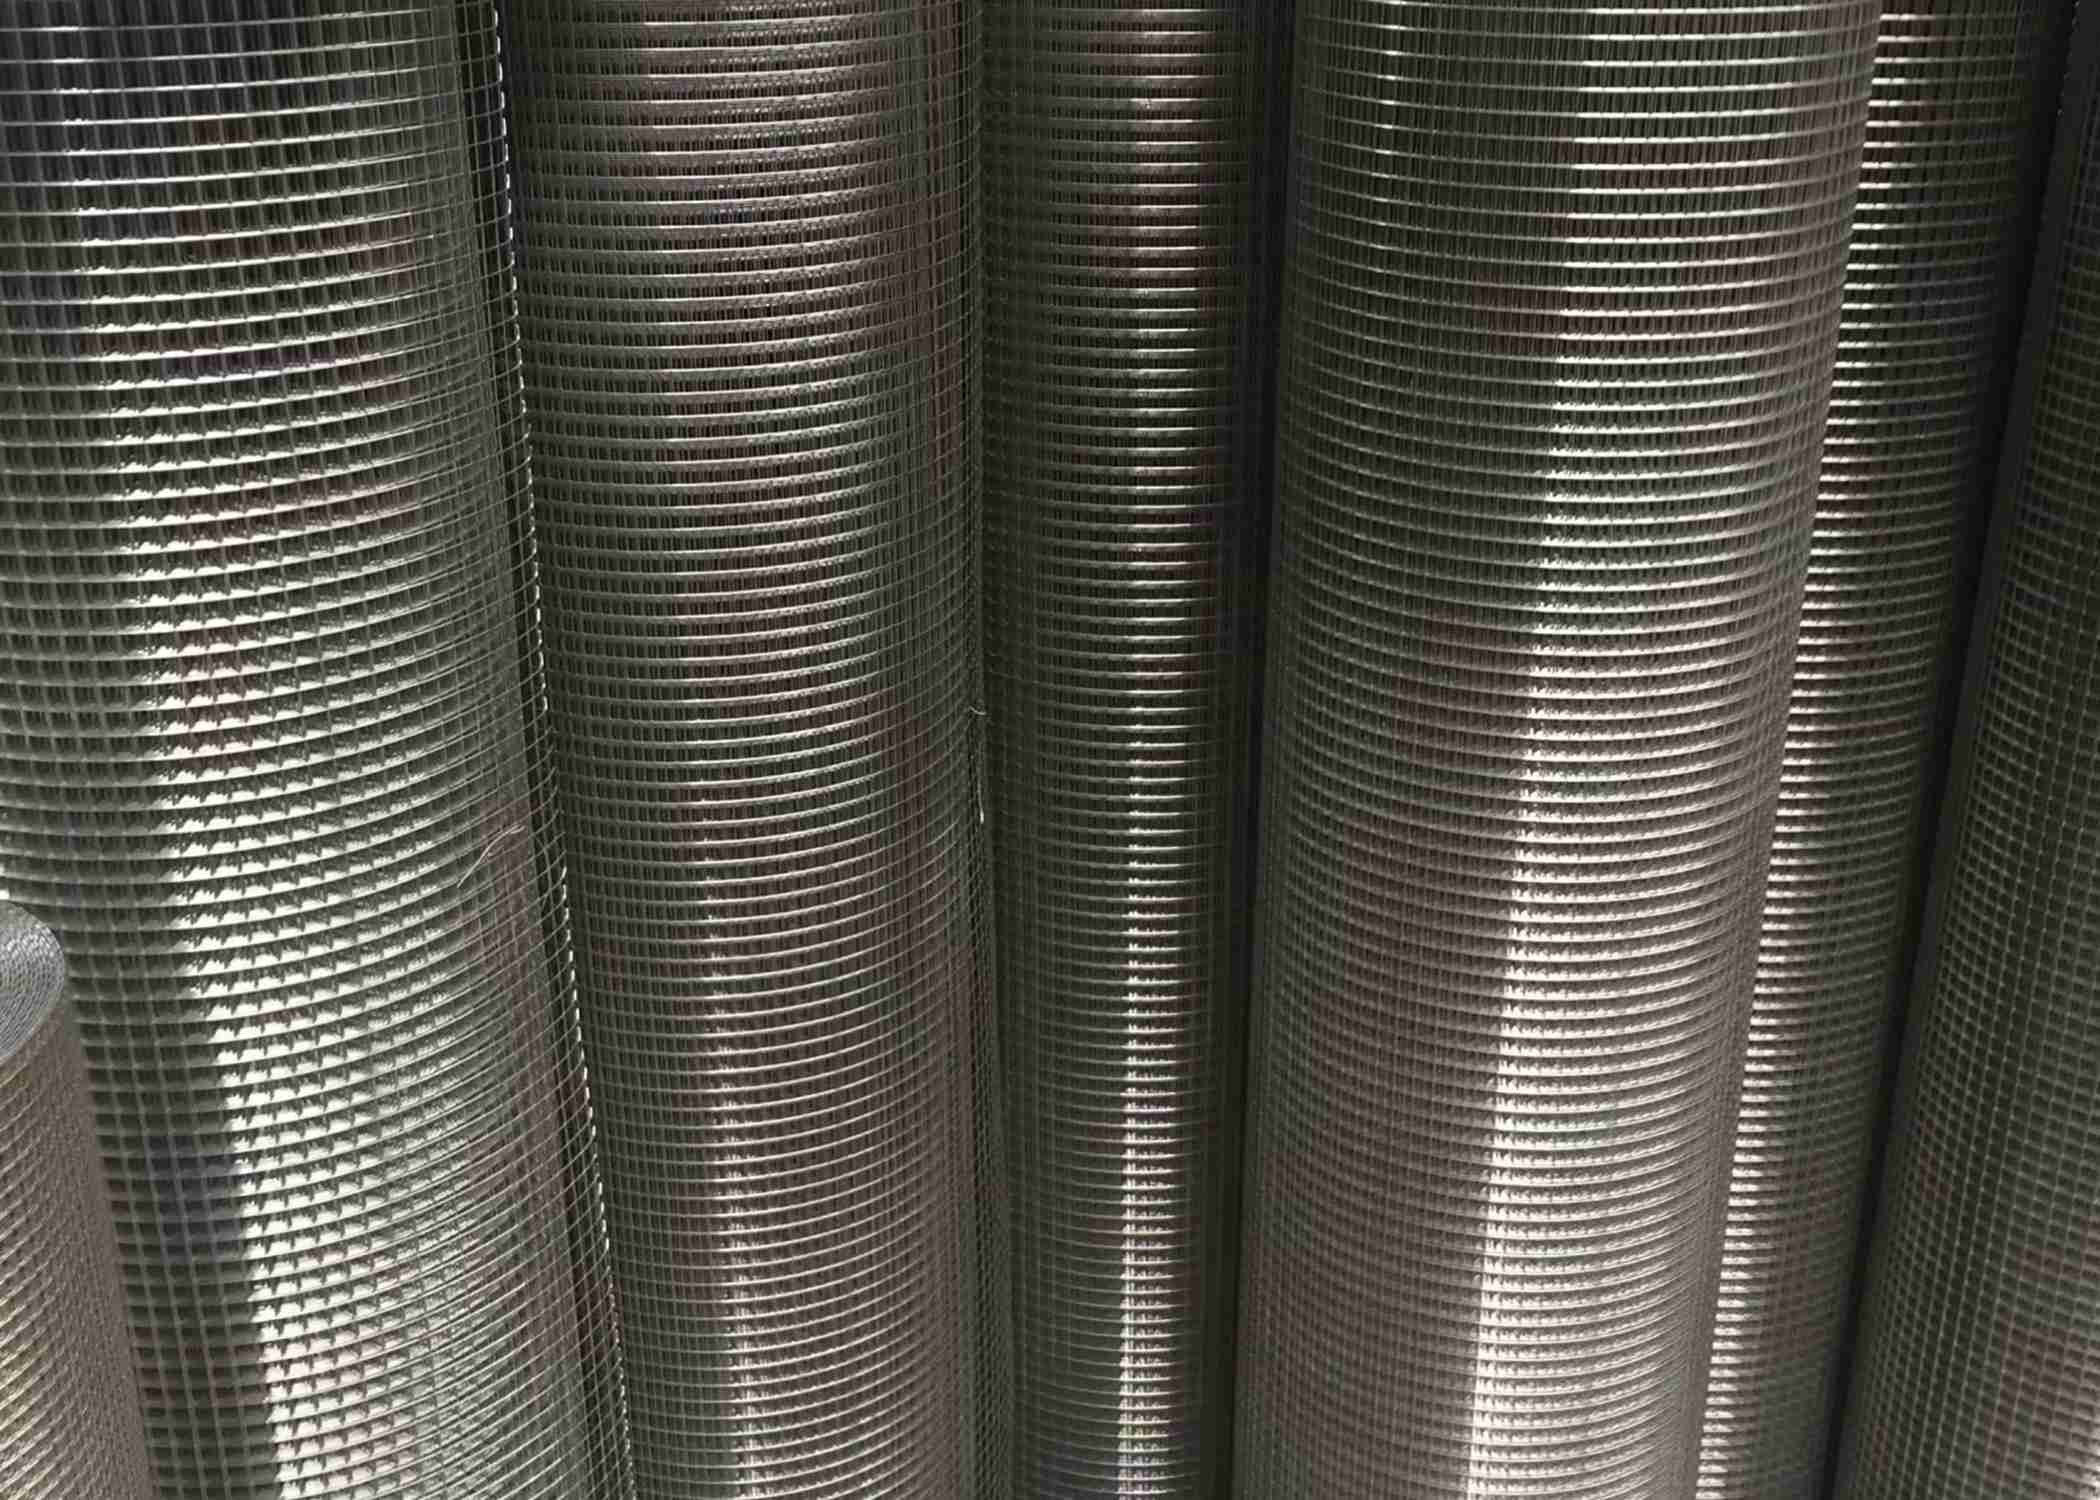 Quality SUS304 Square Hole SS Welded Wire Mesh Minimum Nickel Content 8% for sale